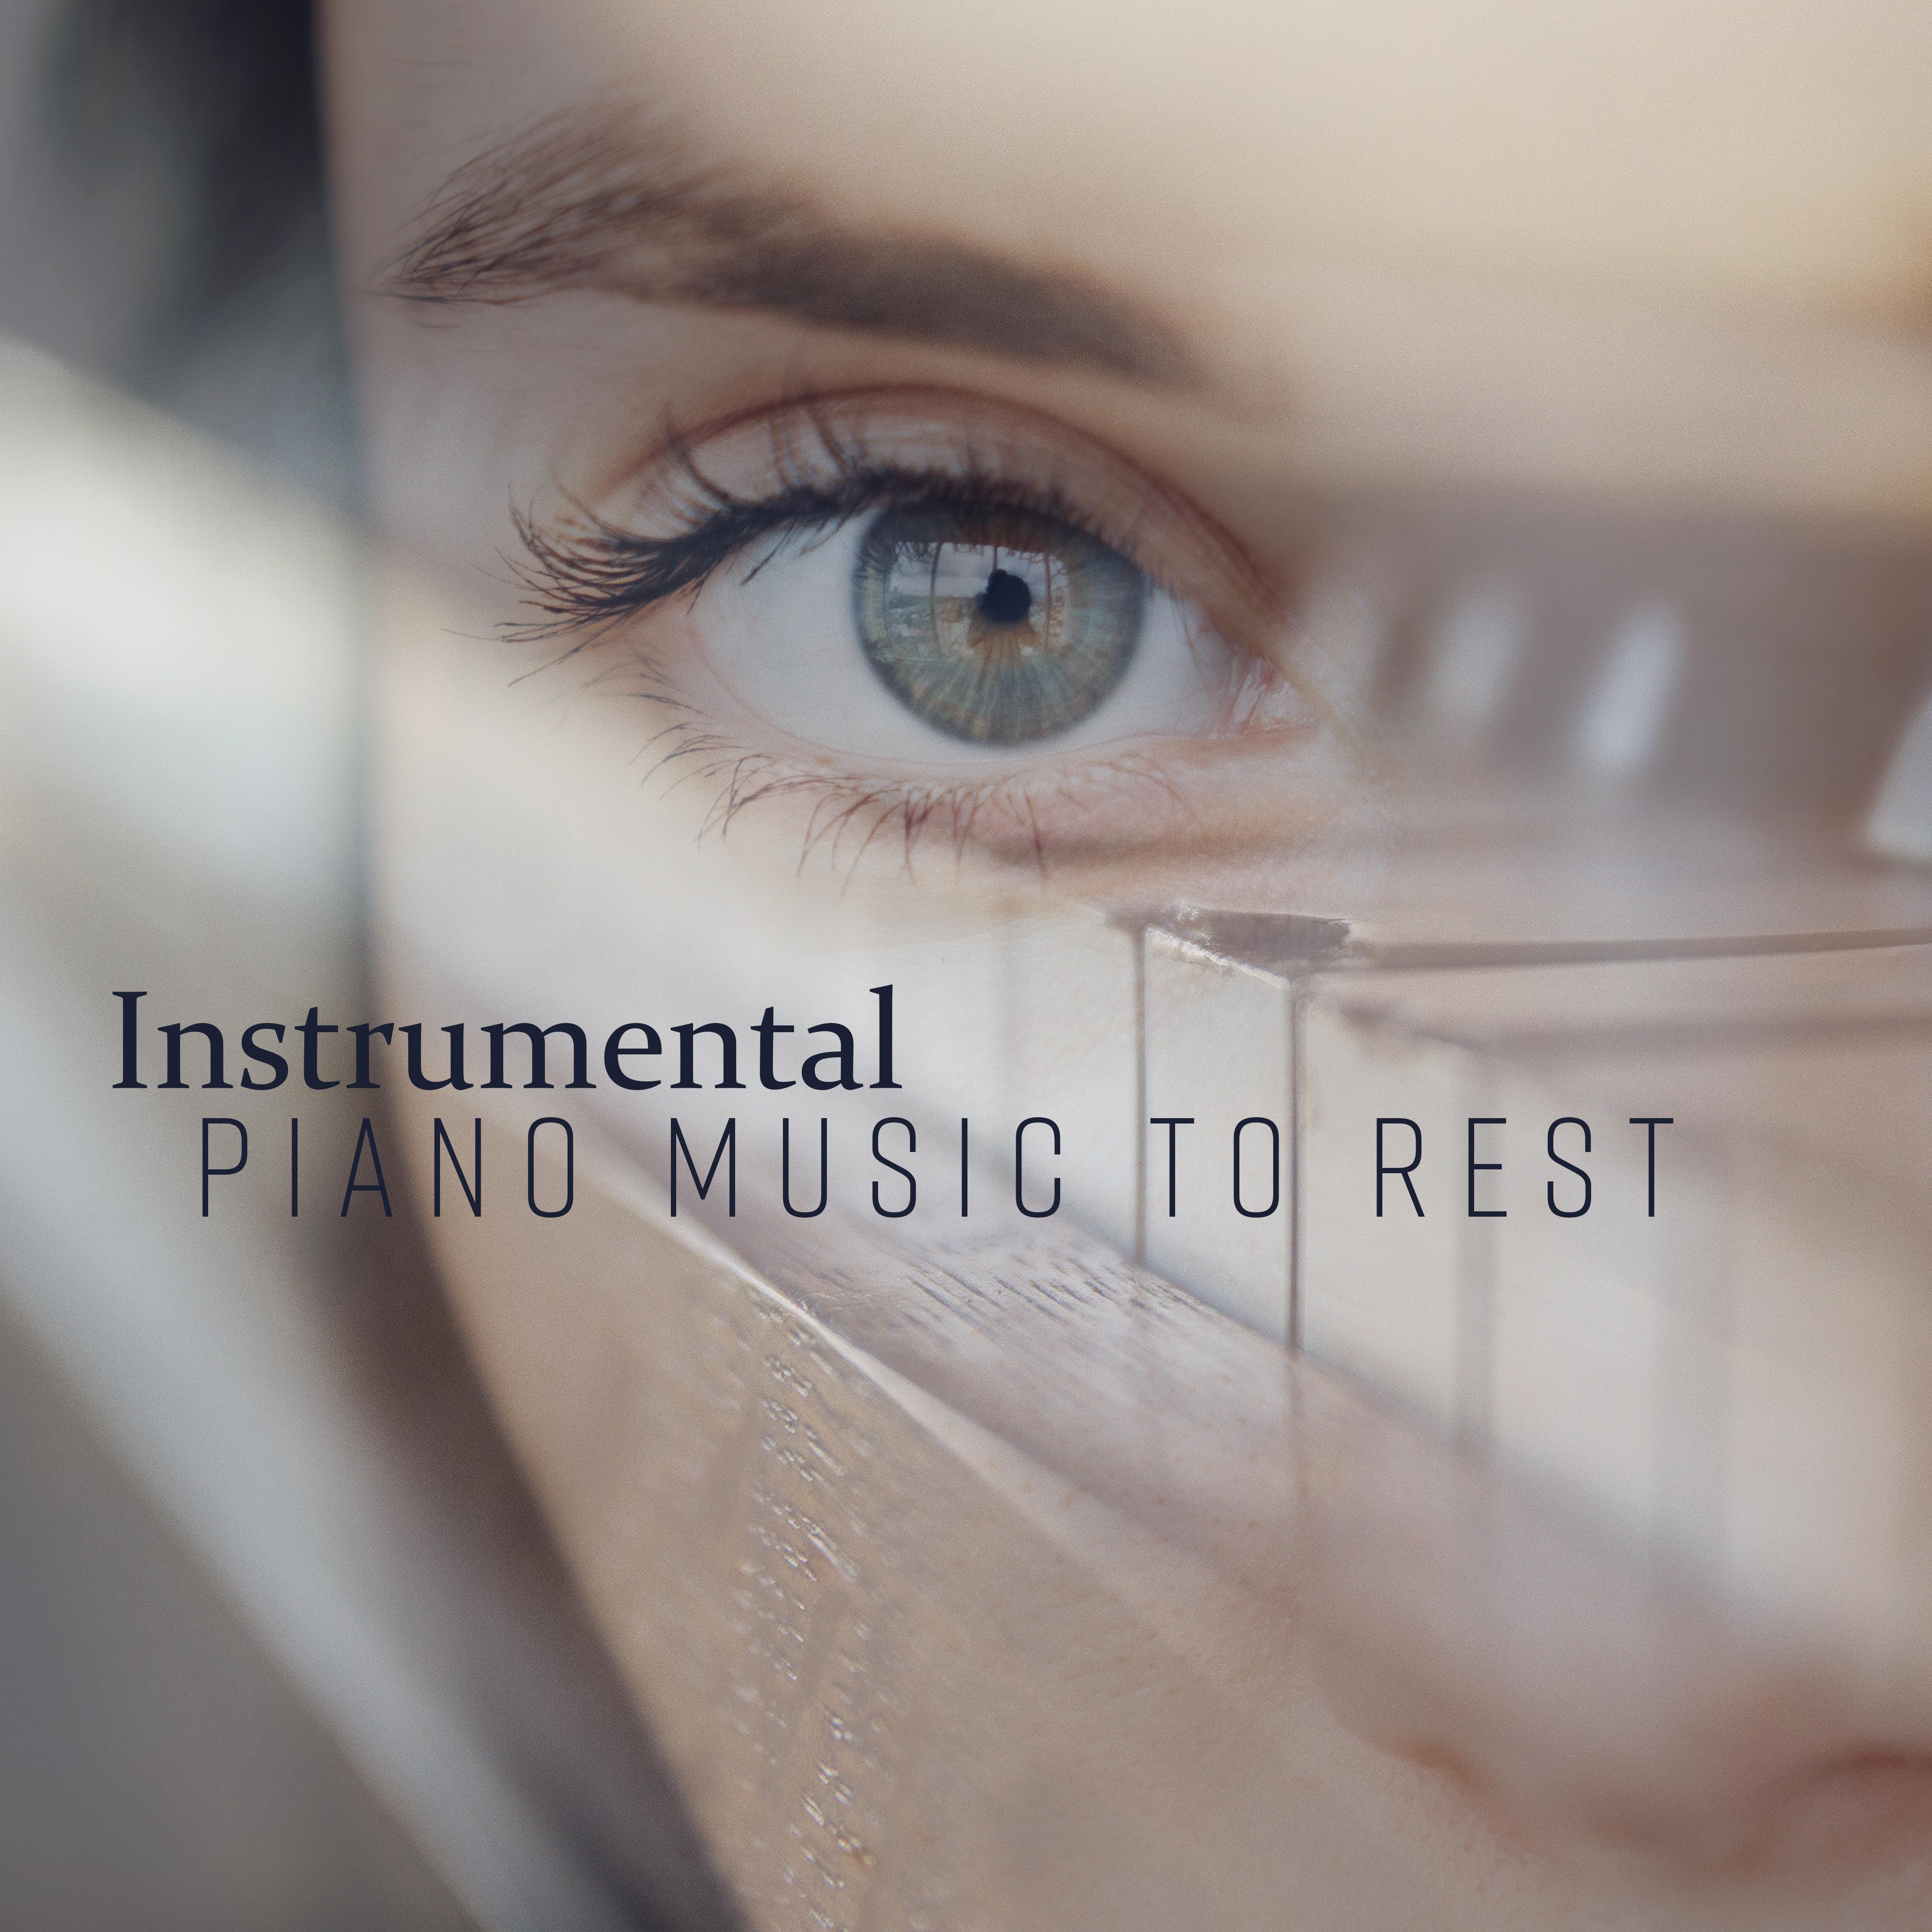 Instrumental Piano Music to Rest